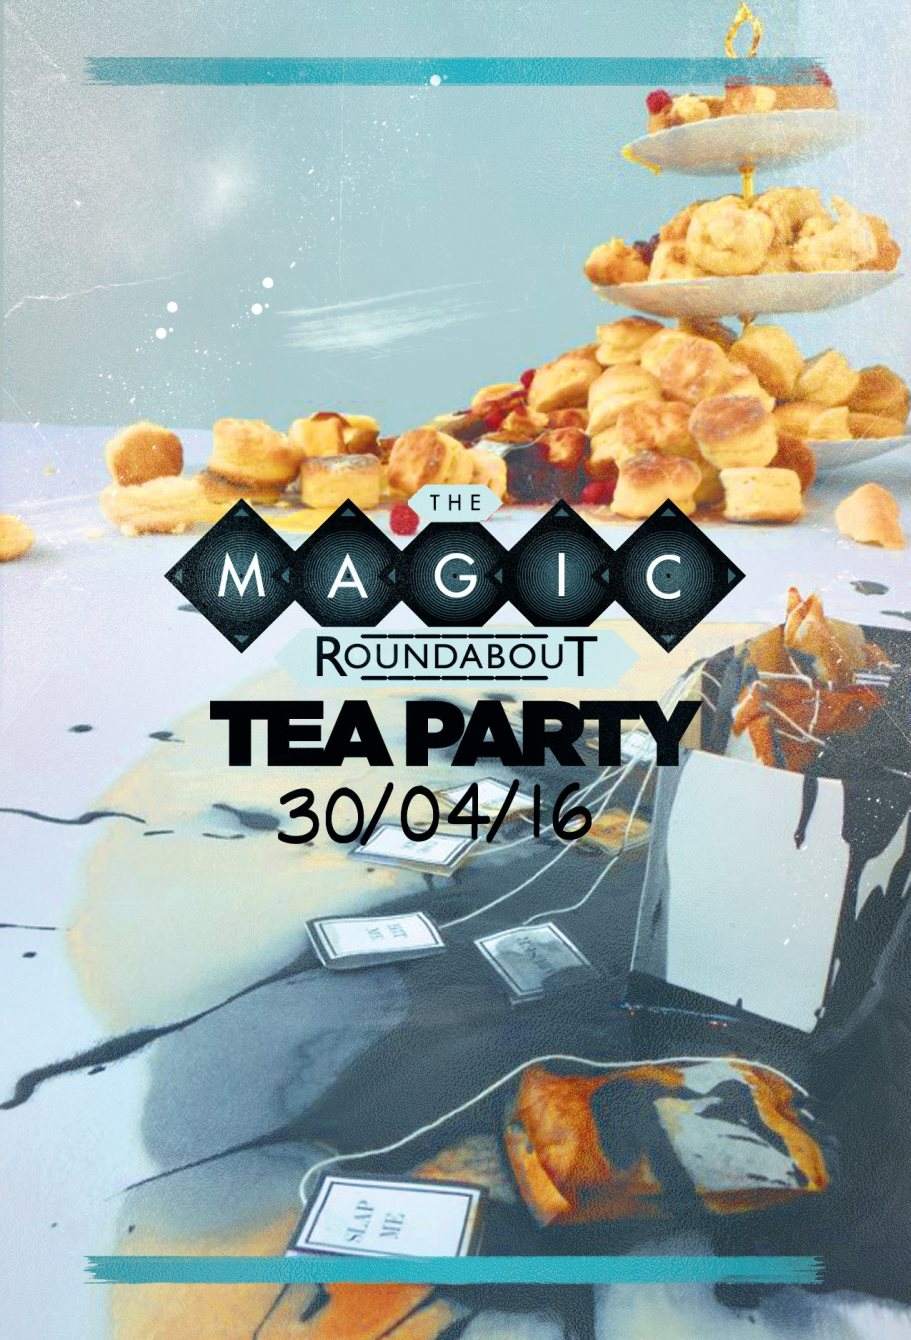 The Magic Roundabout Tea Party with Simeon Belle, Rob Made, Laura Harvey - フライヤー裏